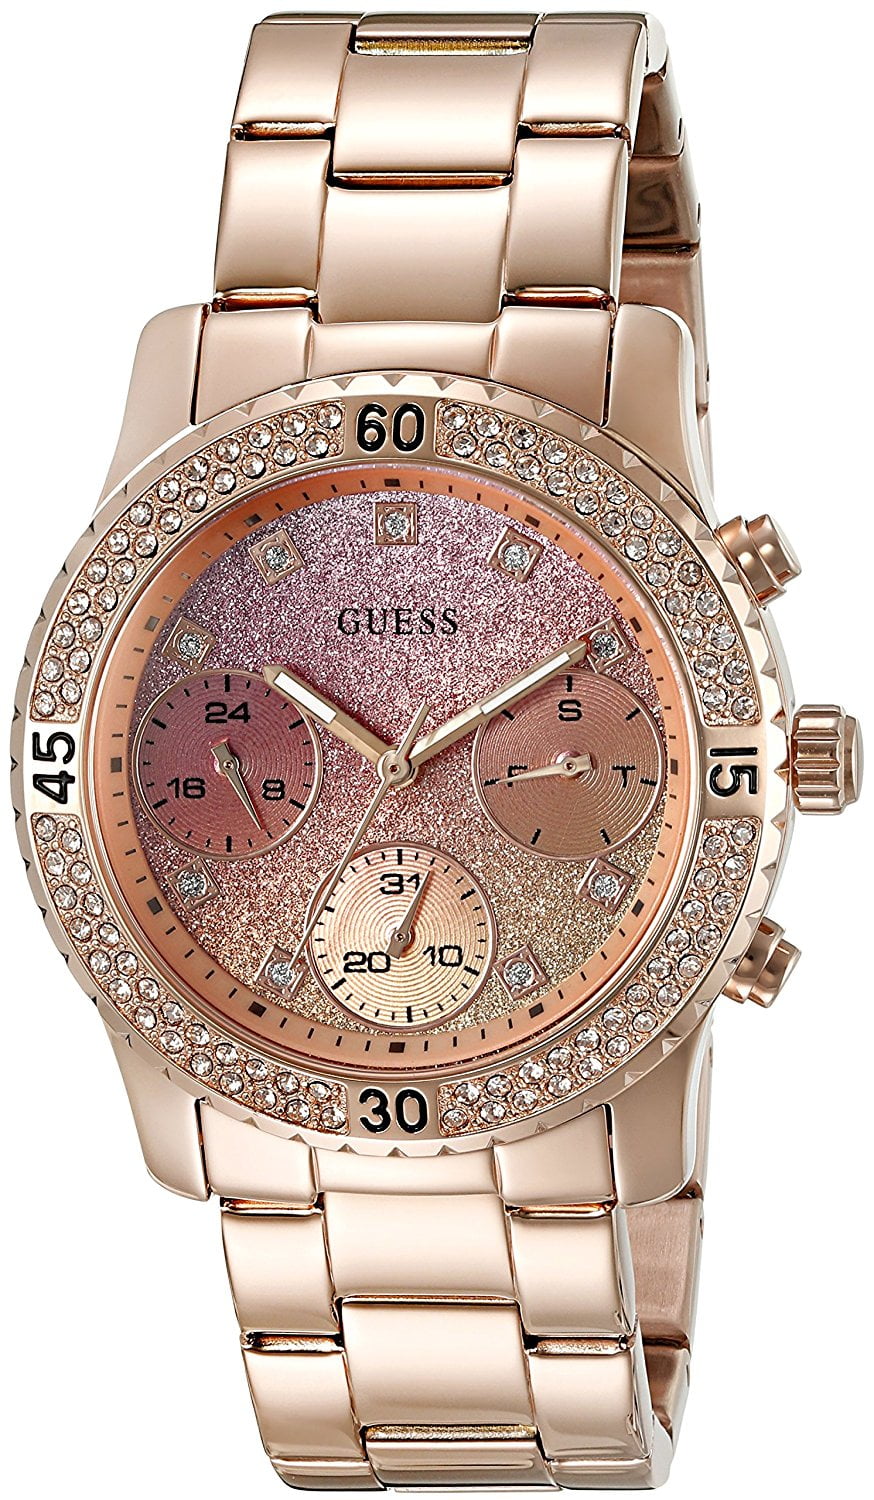 Guess watches prices